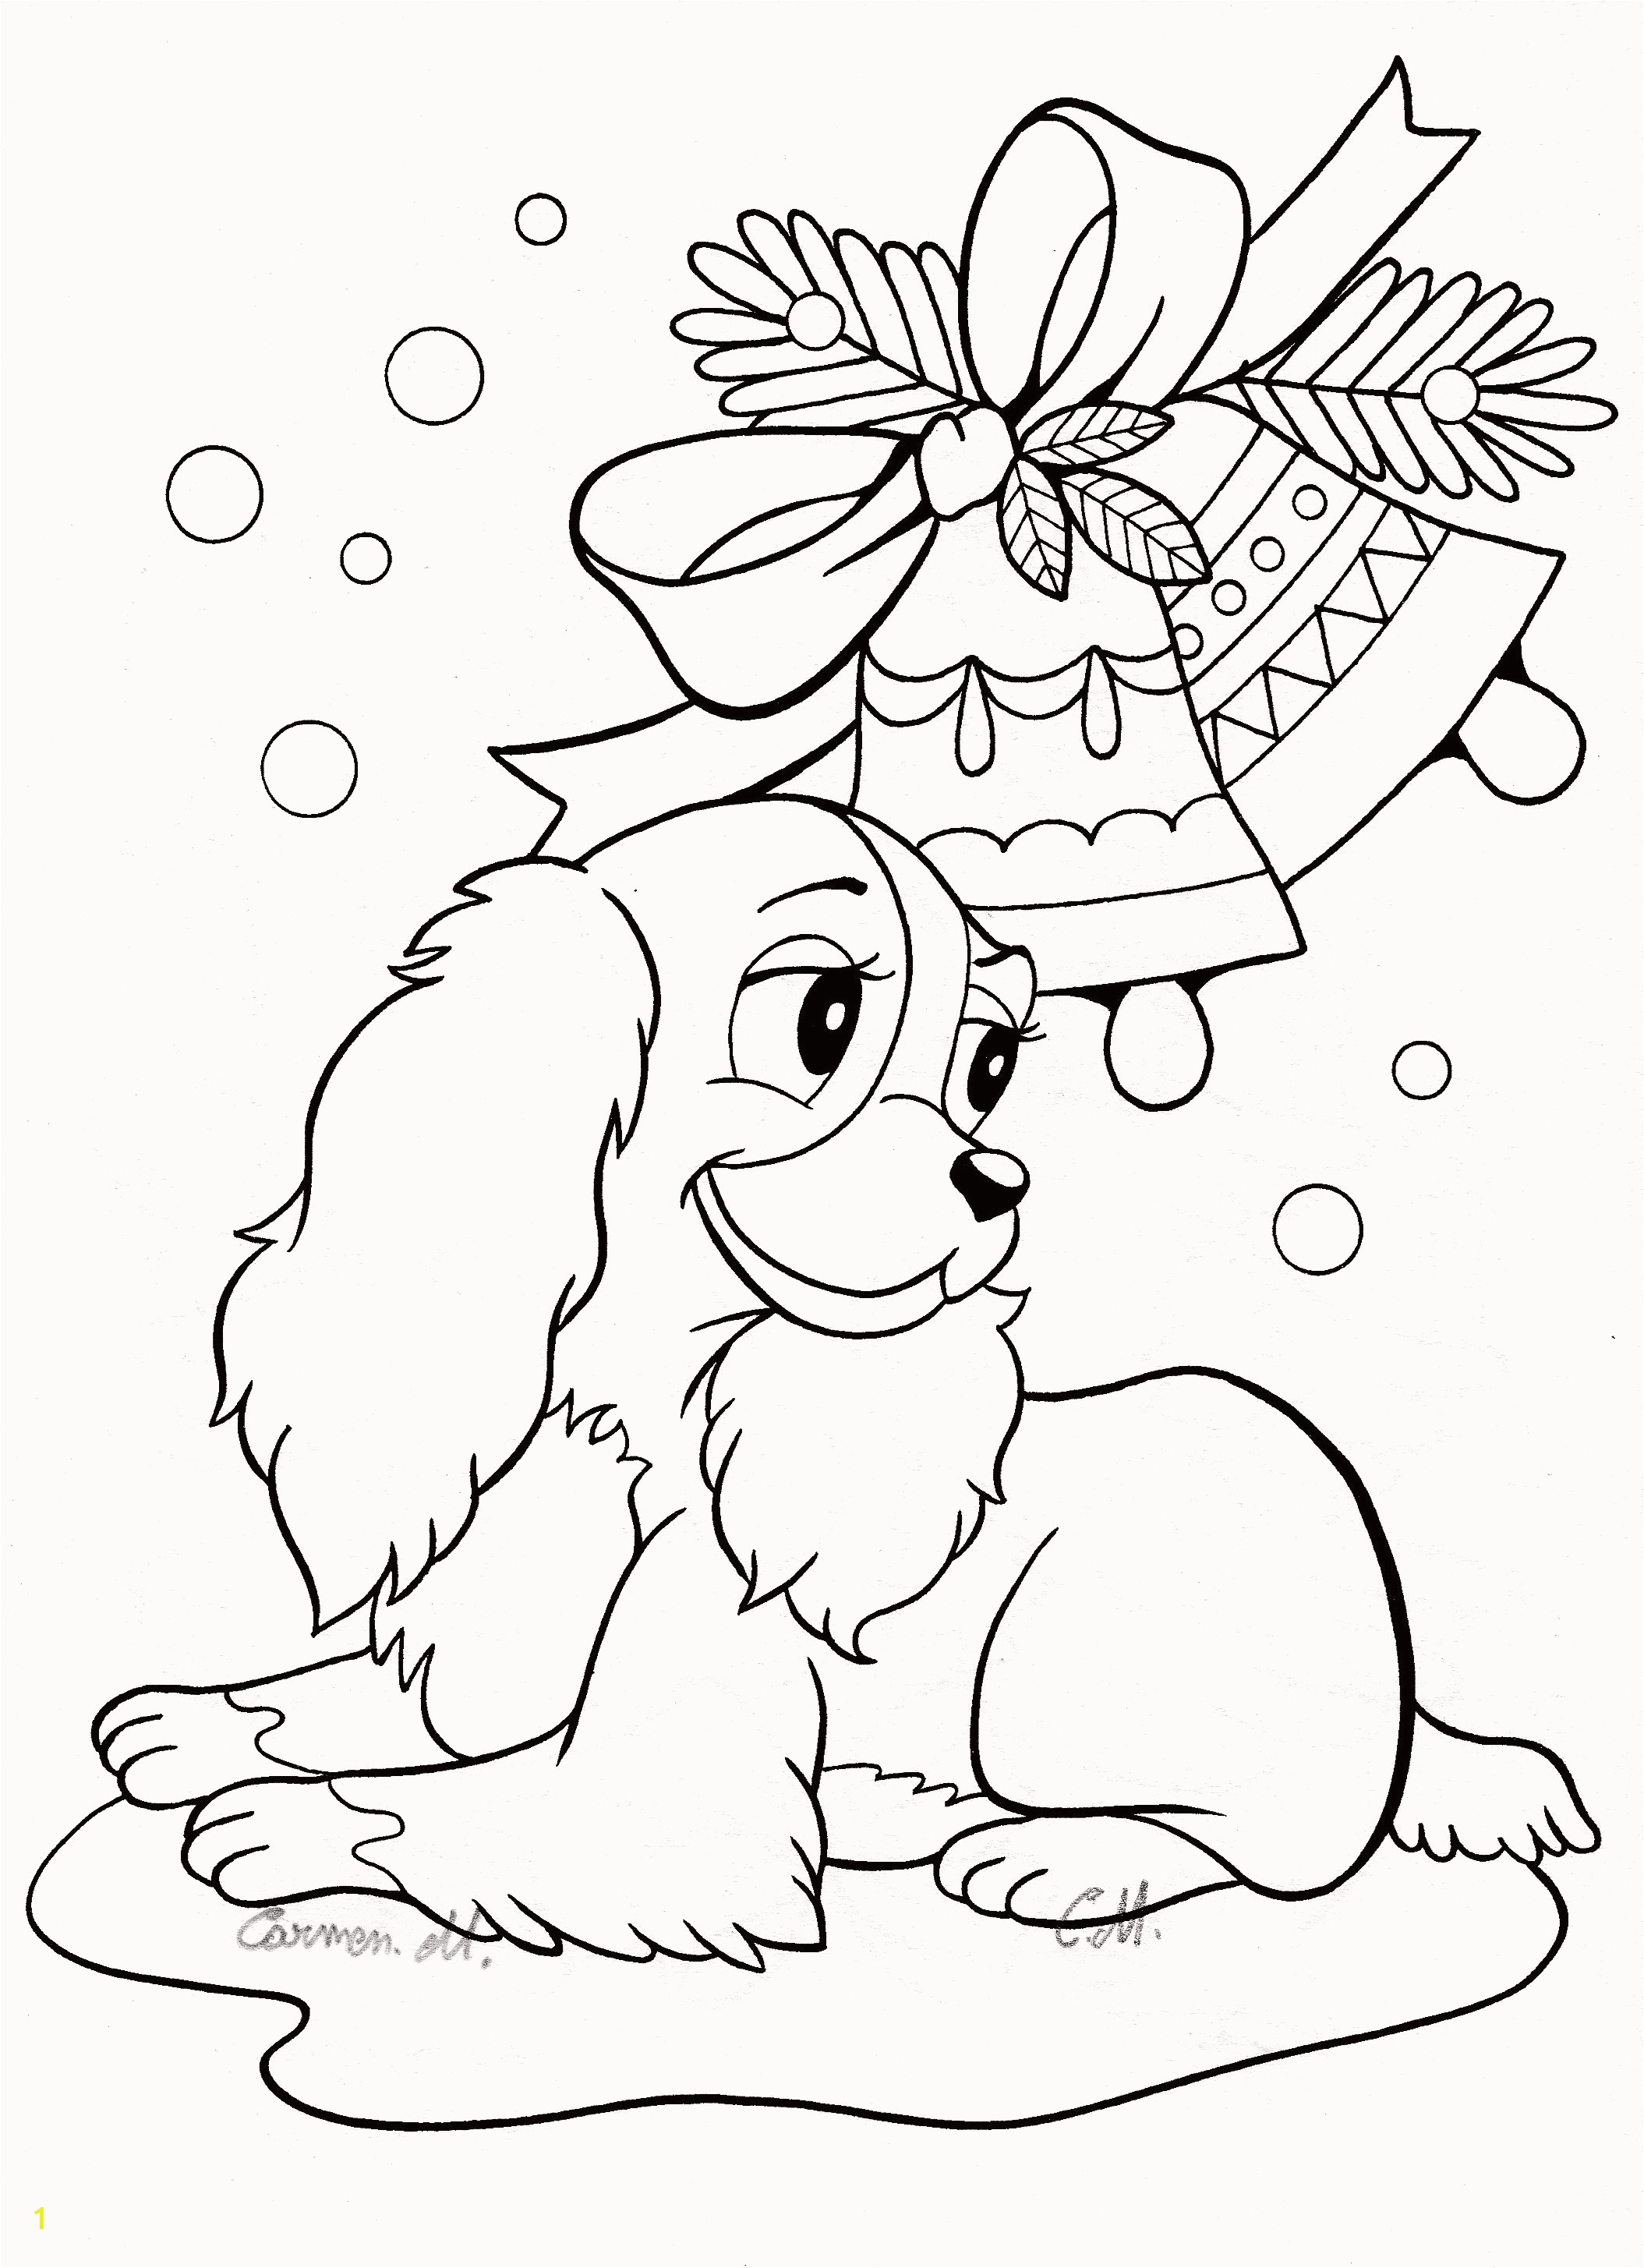 Free Full Size Coloring Pages Perfect Printable Od Dog Coloring Pages Free Colouring Pages Ruva